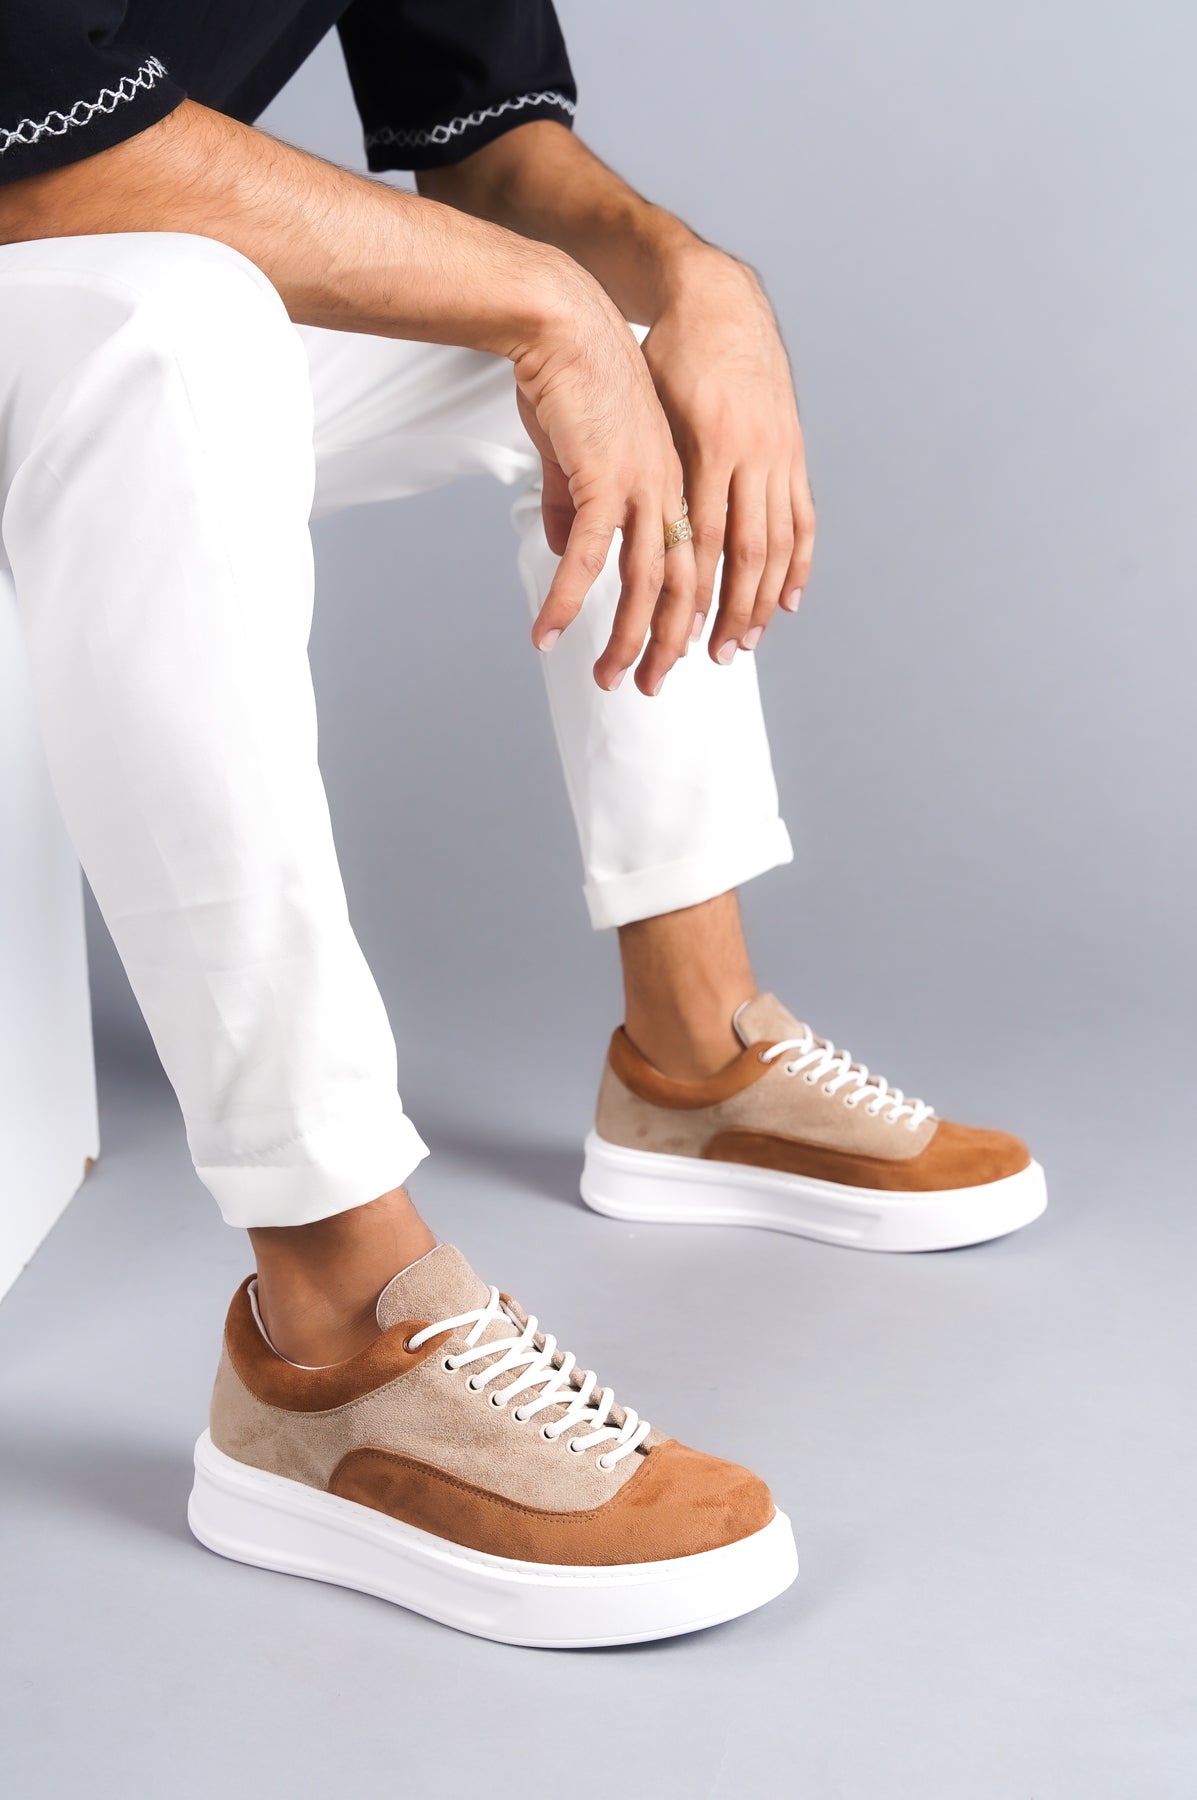 KB-005 Mink Tan Suede Laced Casual Men's Sneakers Shoes - STREETMODE™